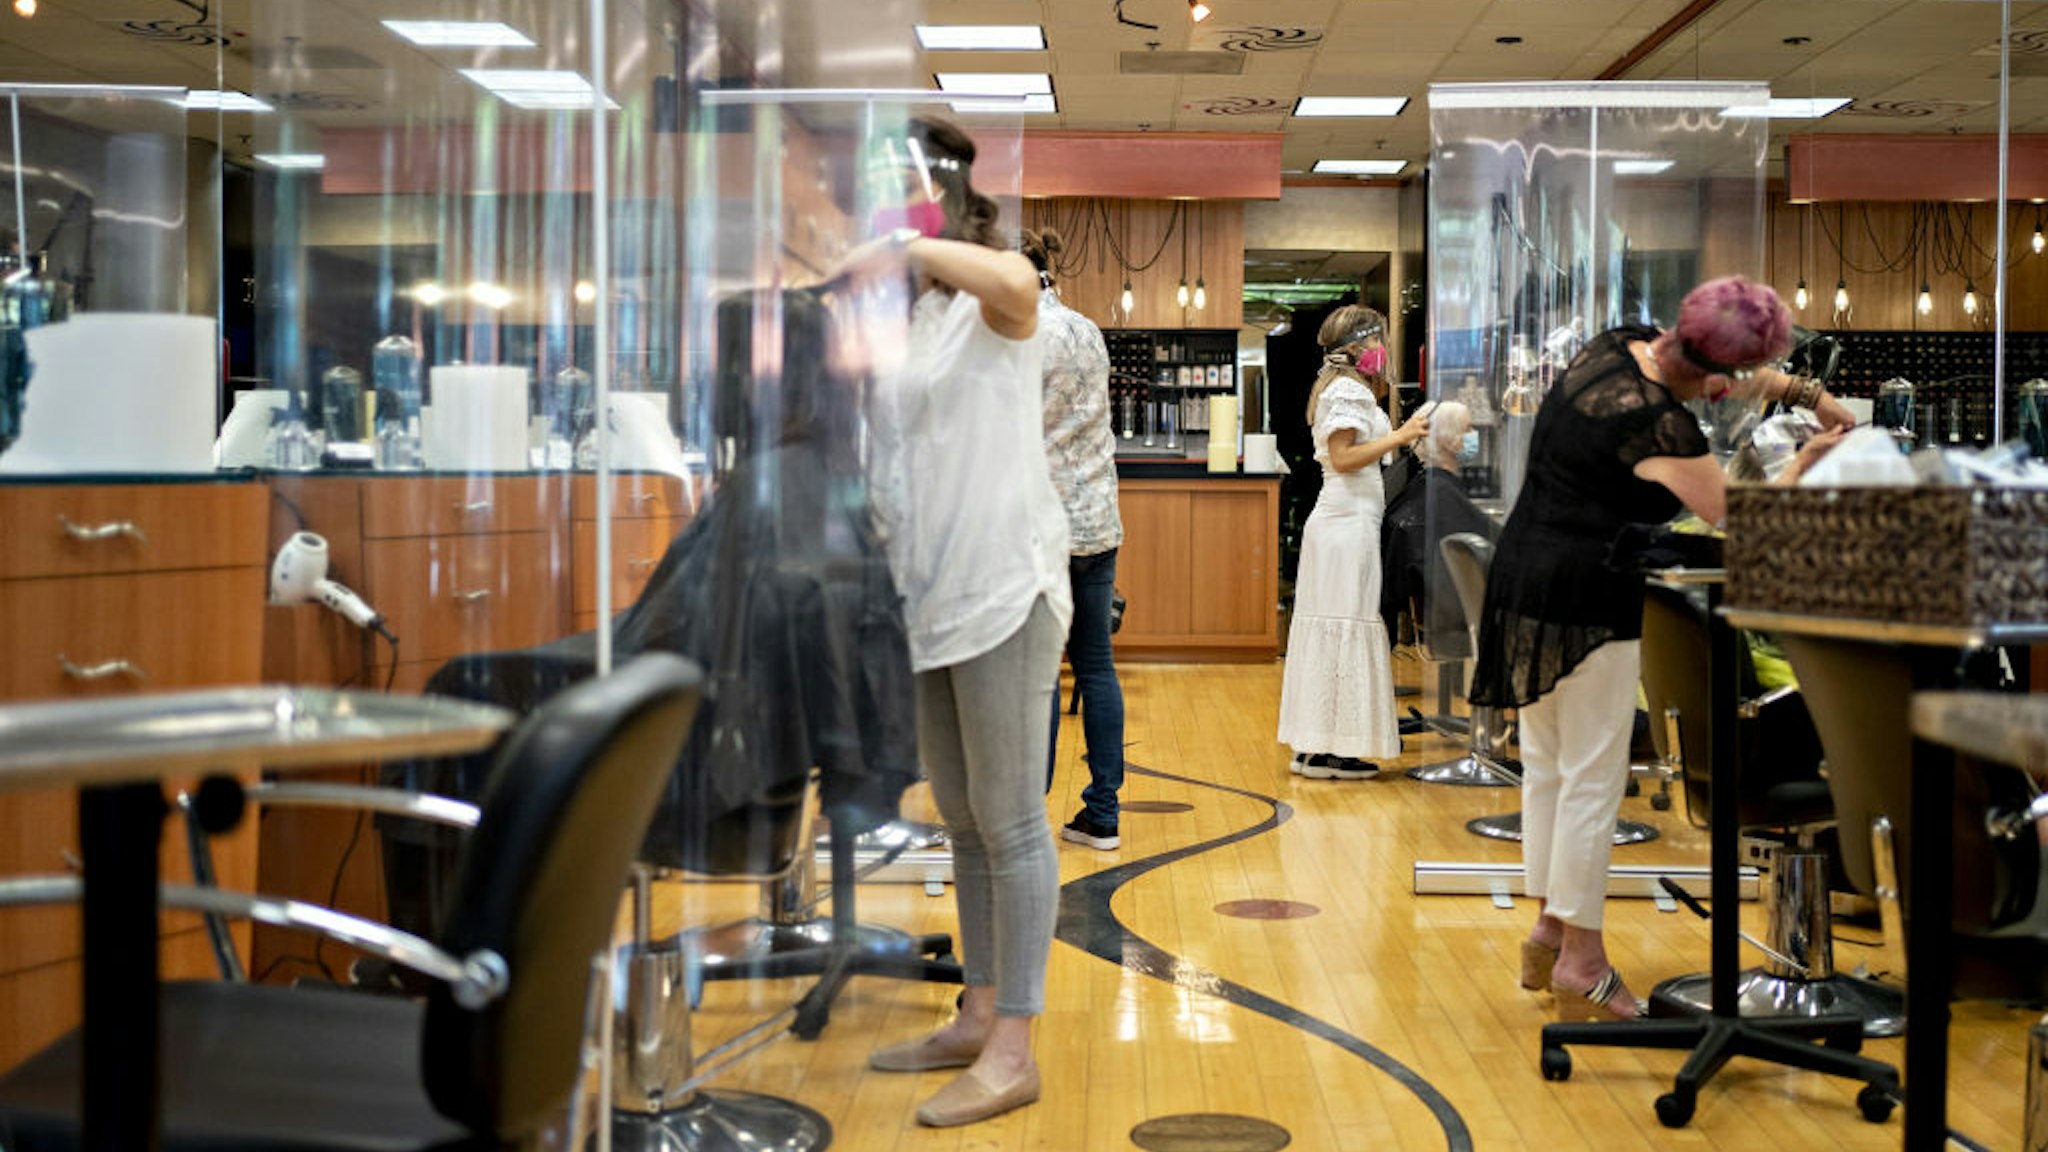 Stylists work behind plastic dividers at a hair salon in Arlington, Virginia, U.S., on Friday, May 29, 2020.